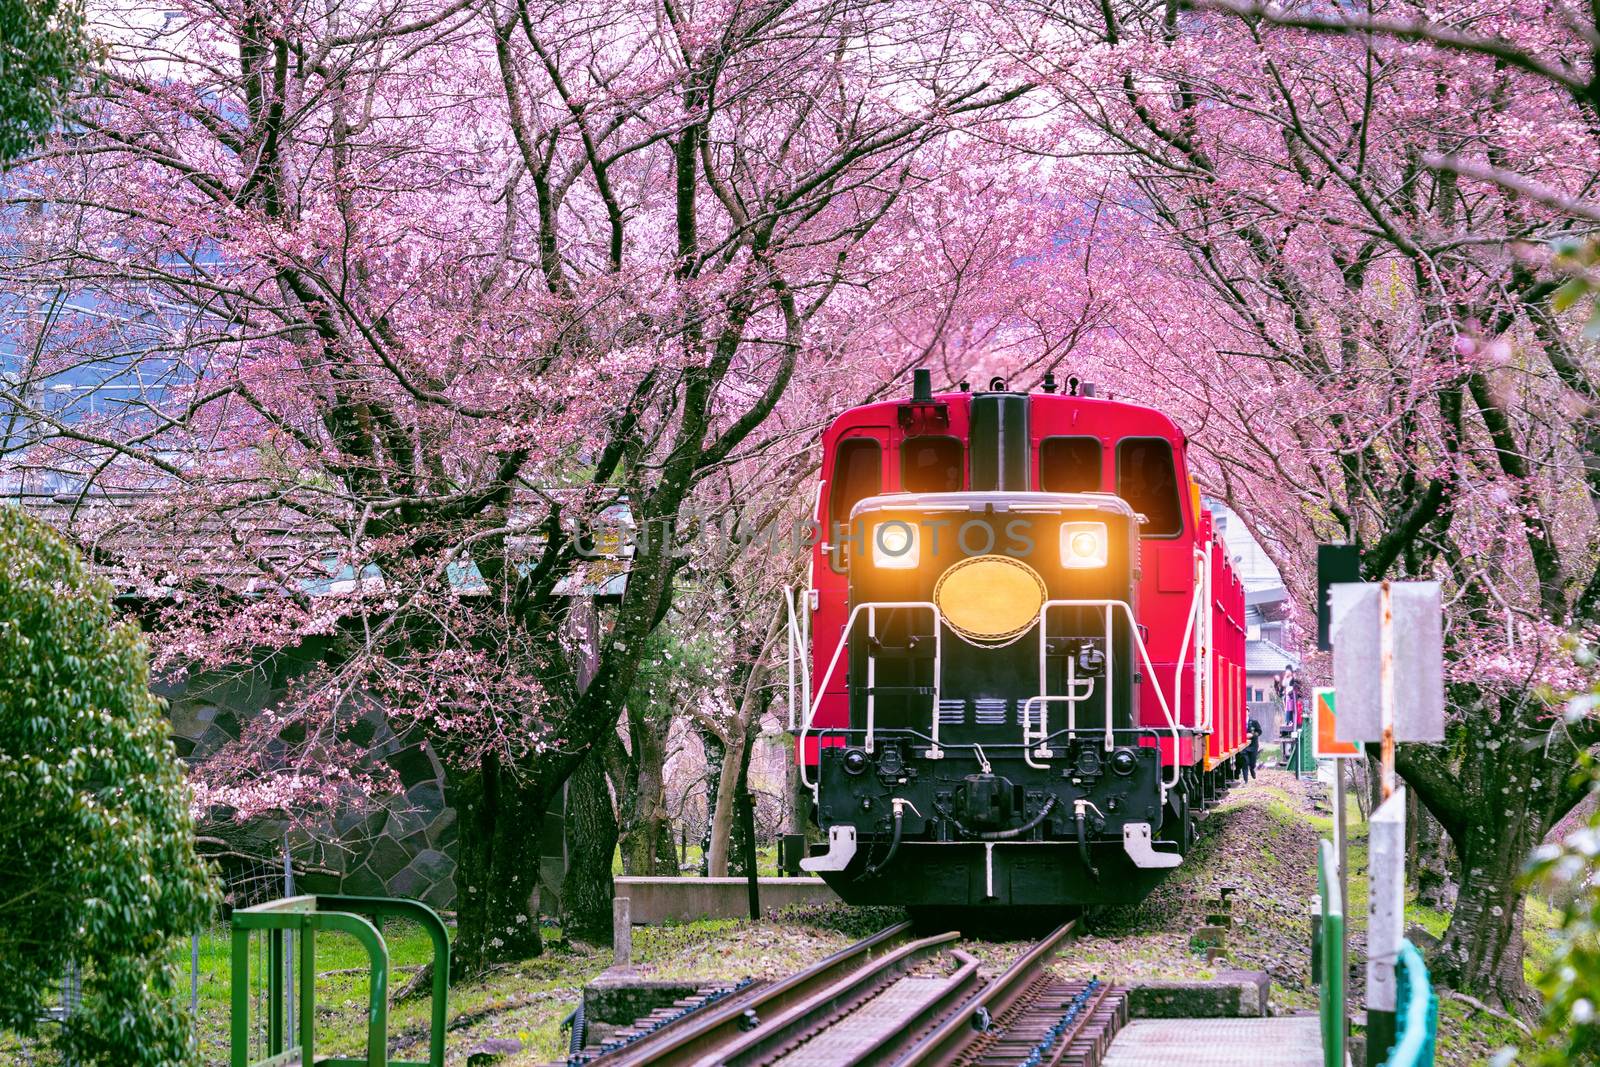 Romantic train runs through tunnel of cherry blossoms in Kyoto, Japan. by gutarphotoghaphy